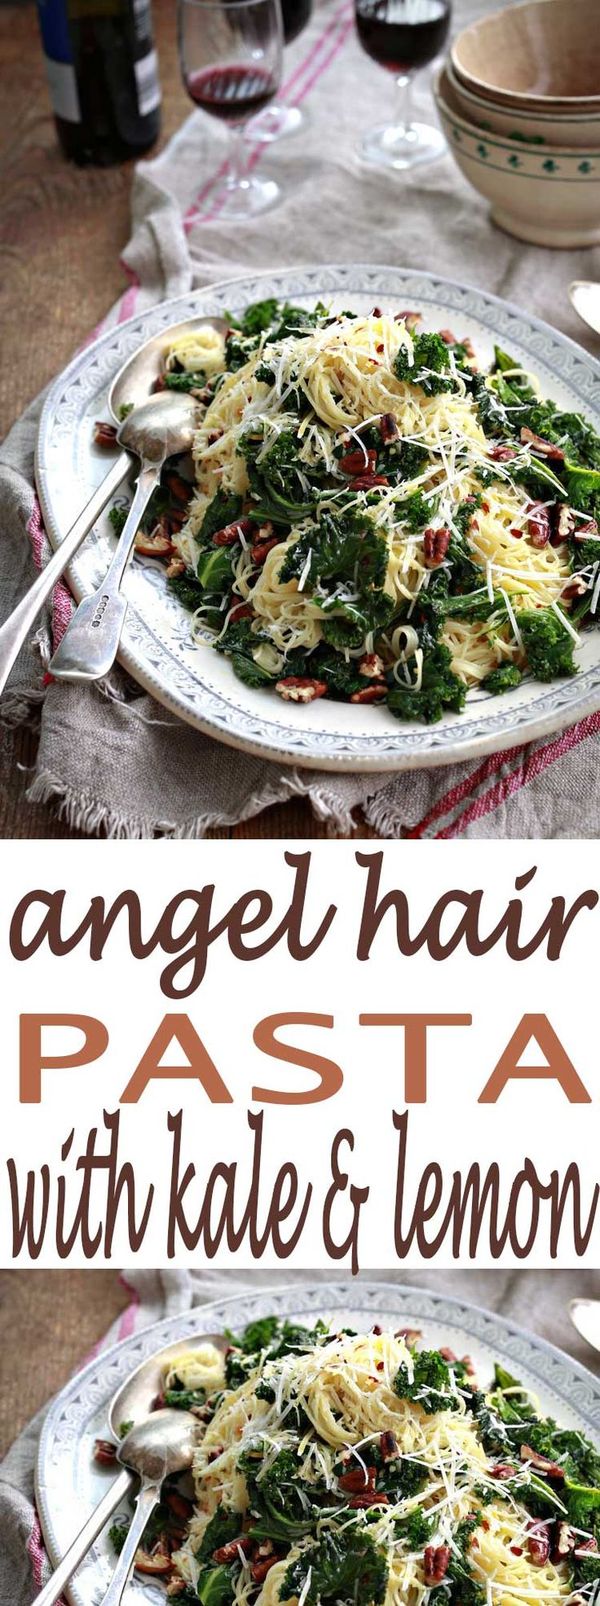 Angel Hair Pasta with Kale and Lemon